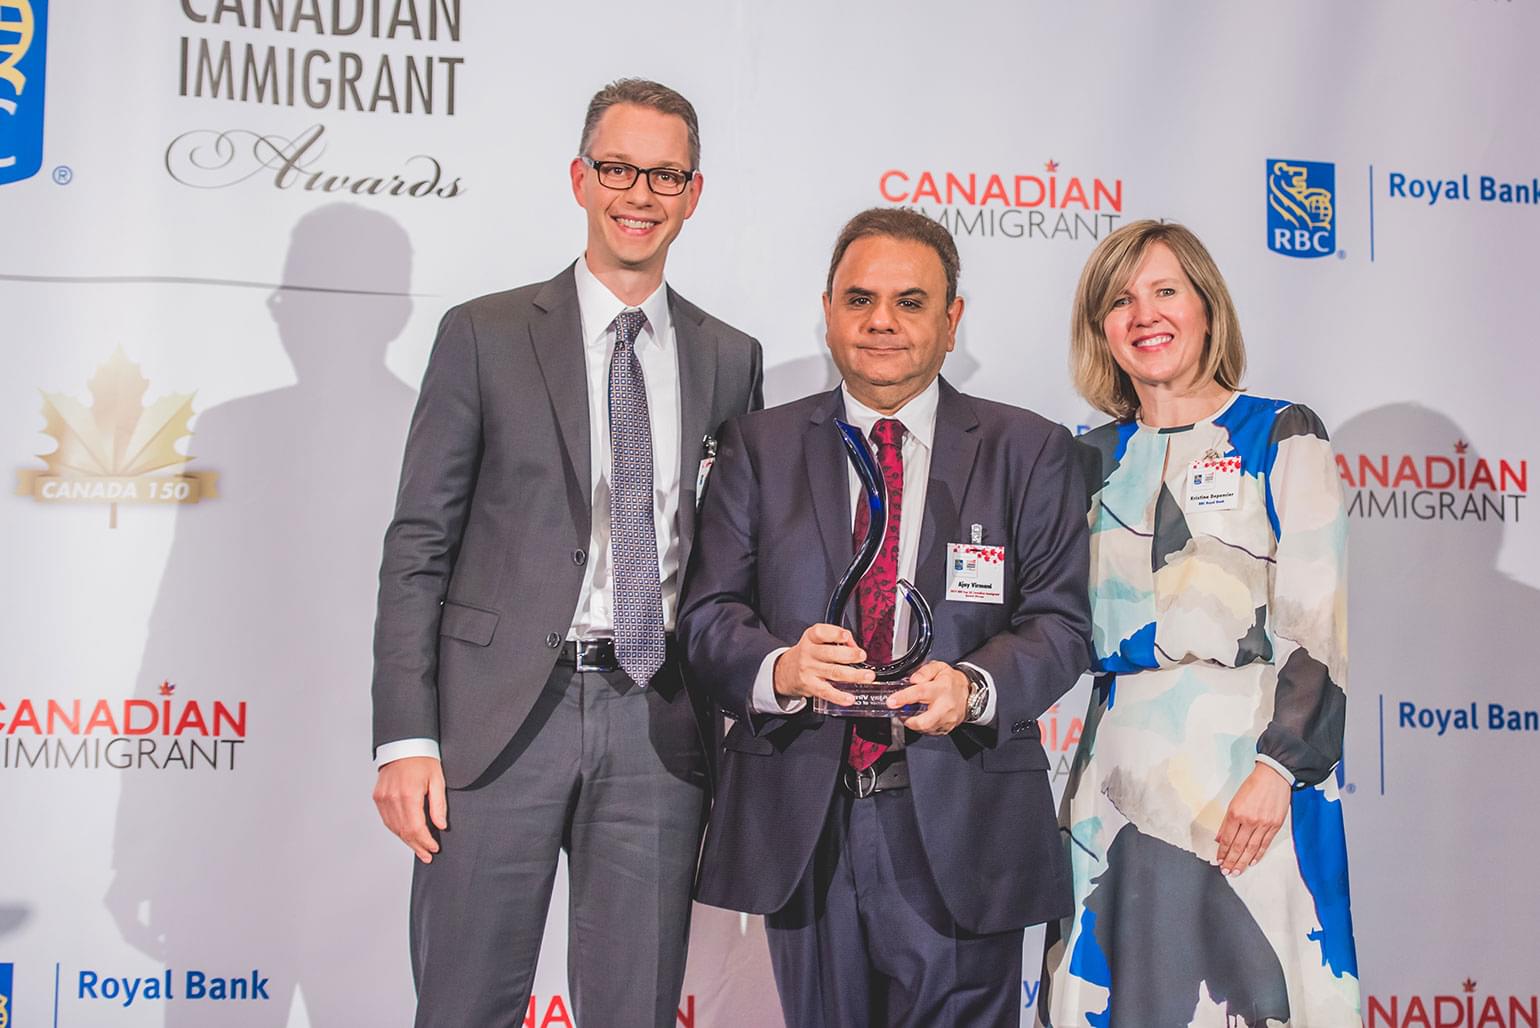 Ajay was recently recognized as a winner in the annual RBC Top 25 Canadian Immigrant Awards – an award that celebrates the outstanding accomplishments made by Canadian newcomers.